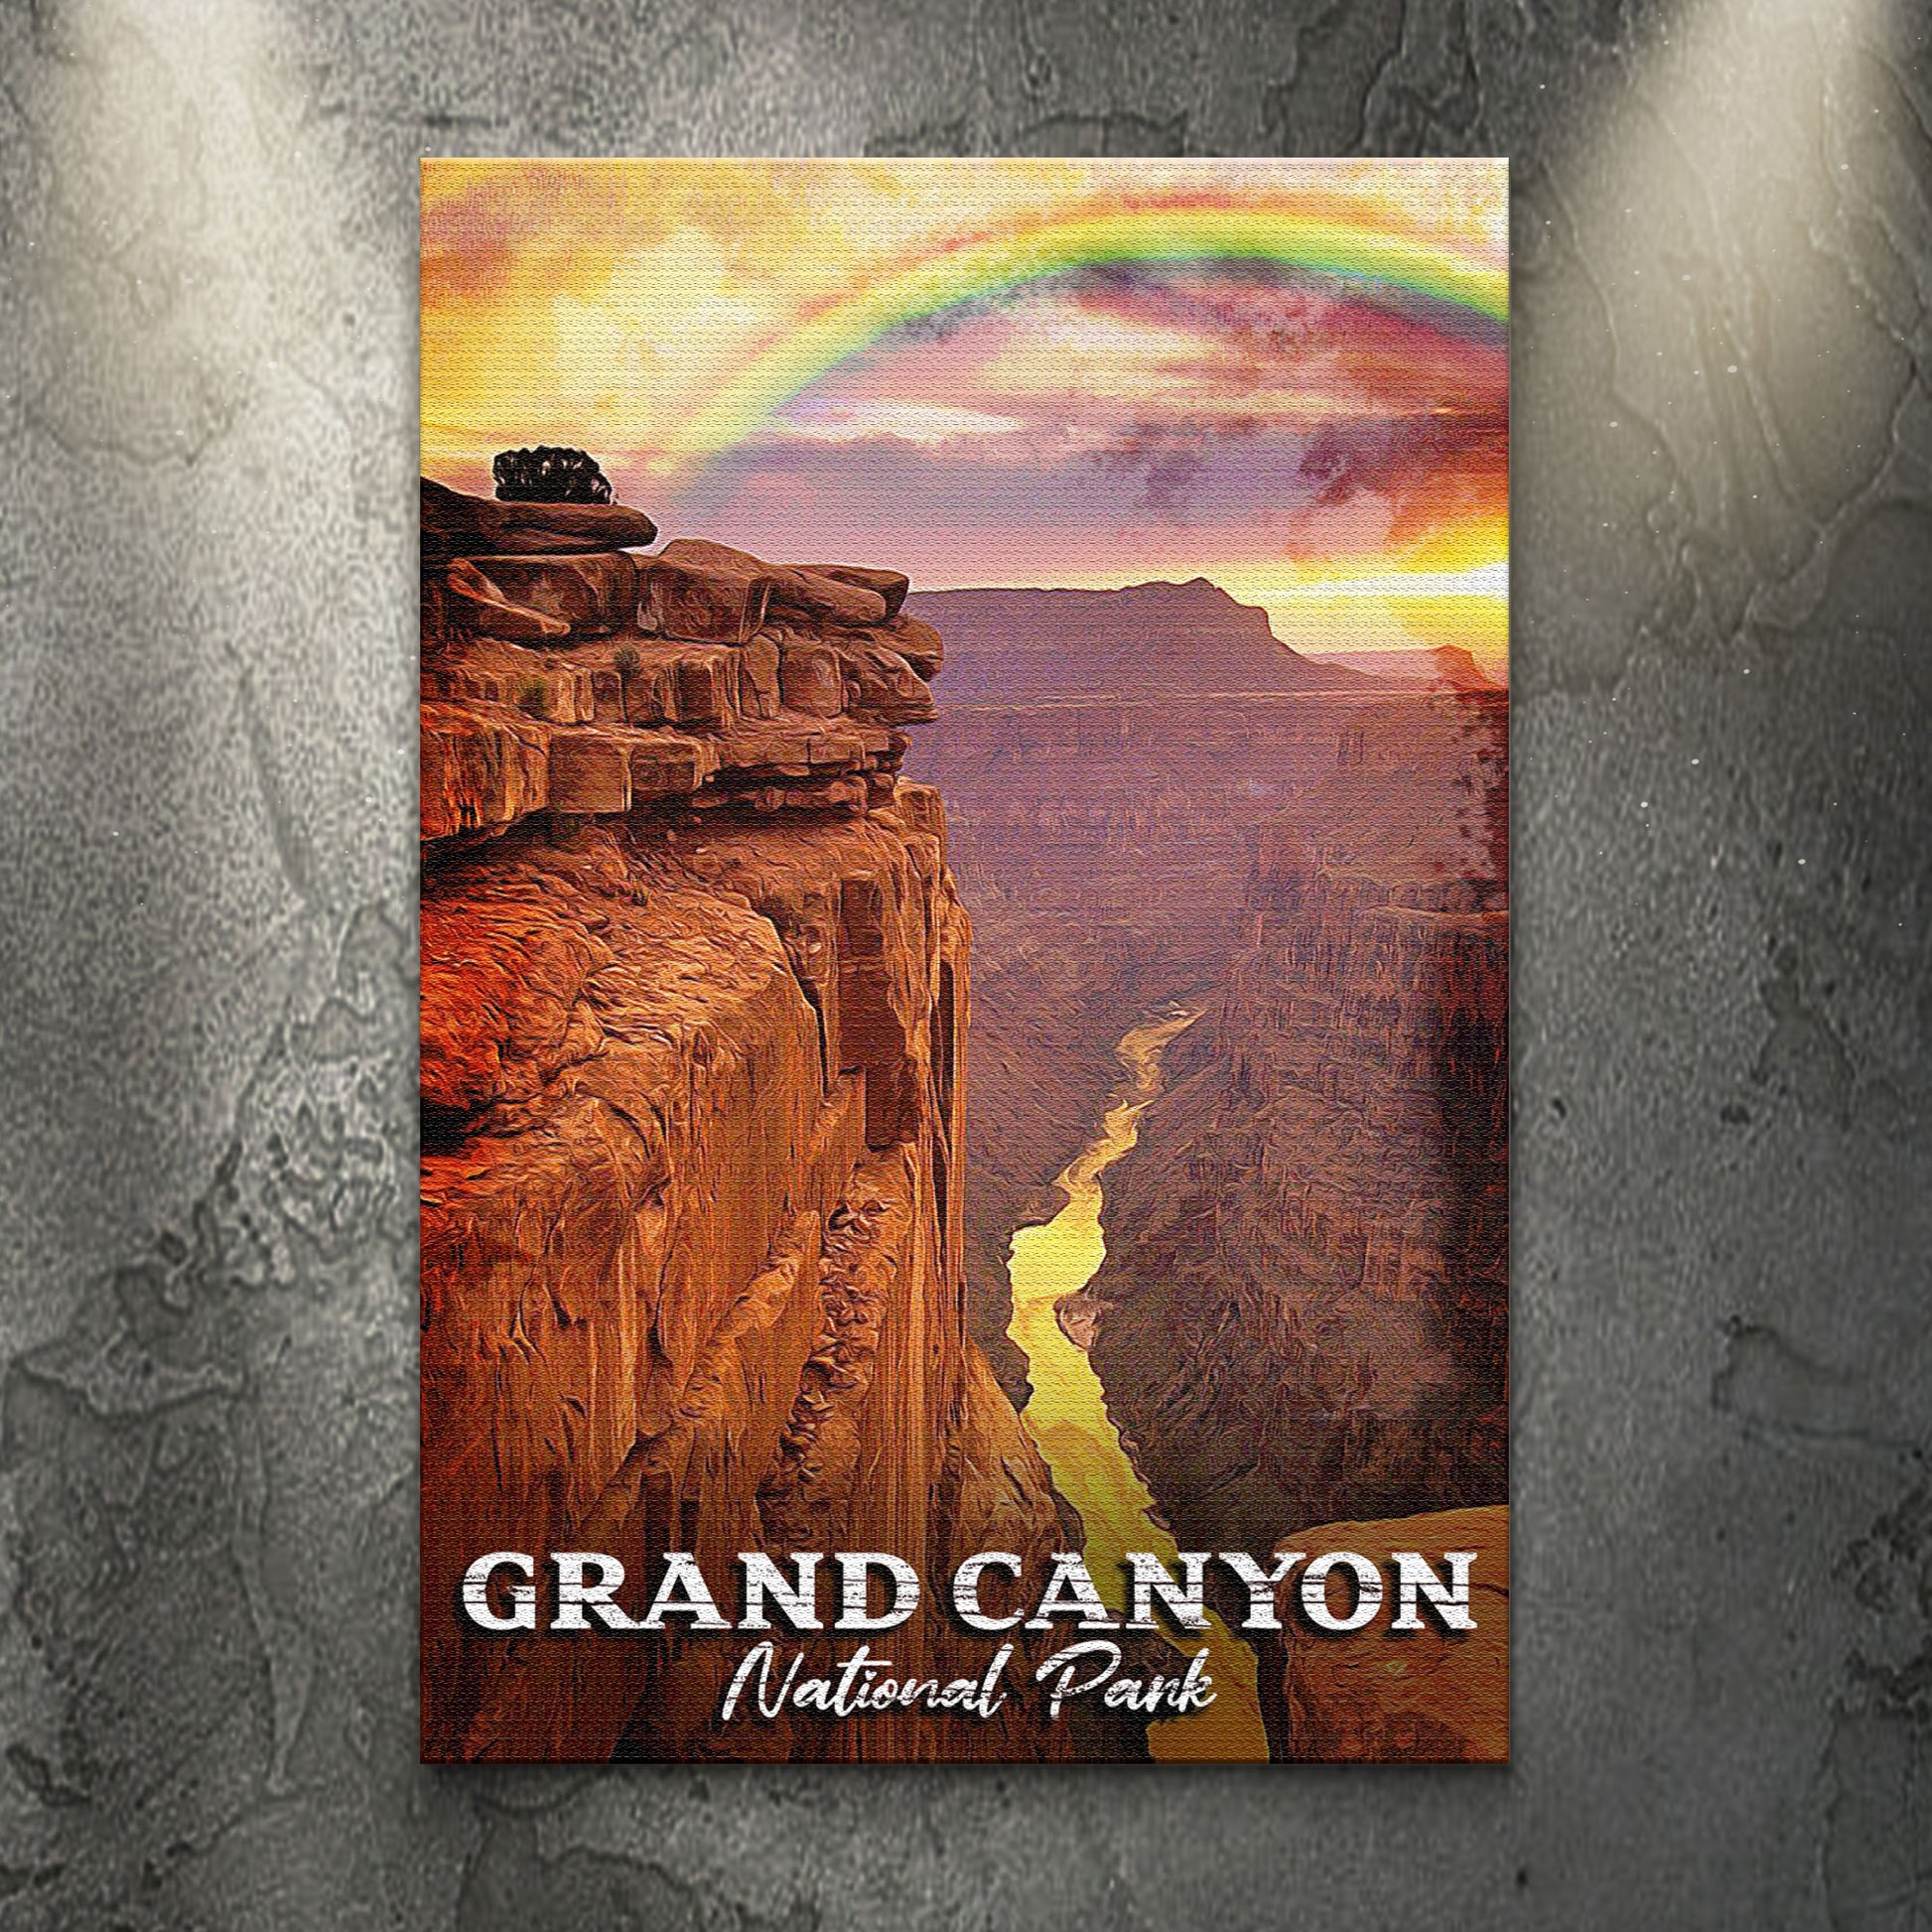 Grand Canyon Canvas Wall Art - Image by Tailored Canvases